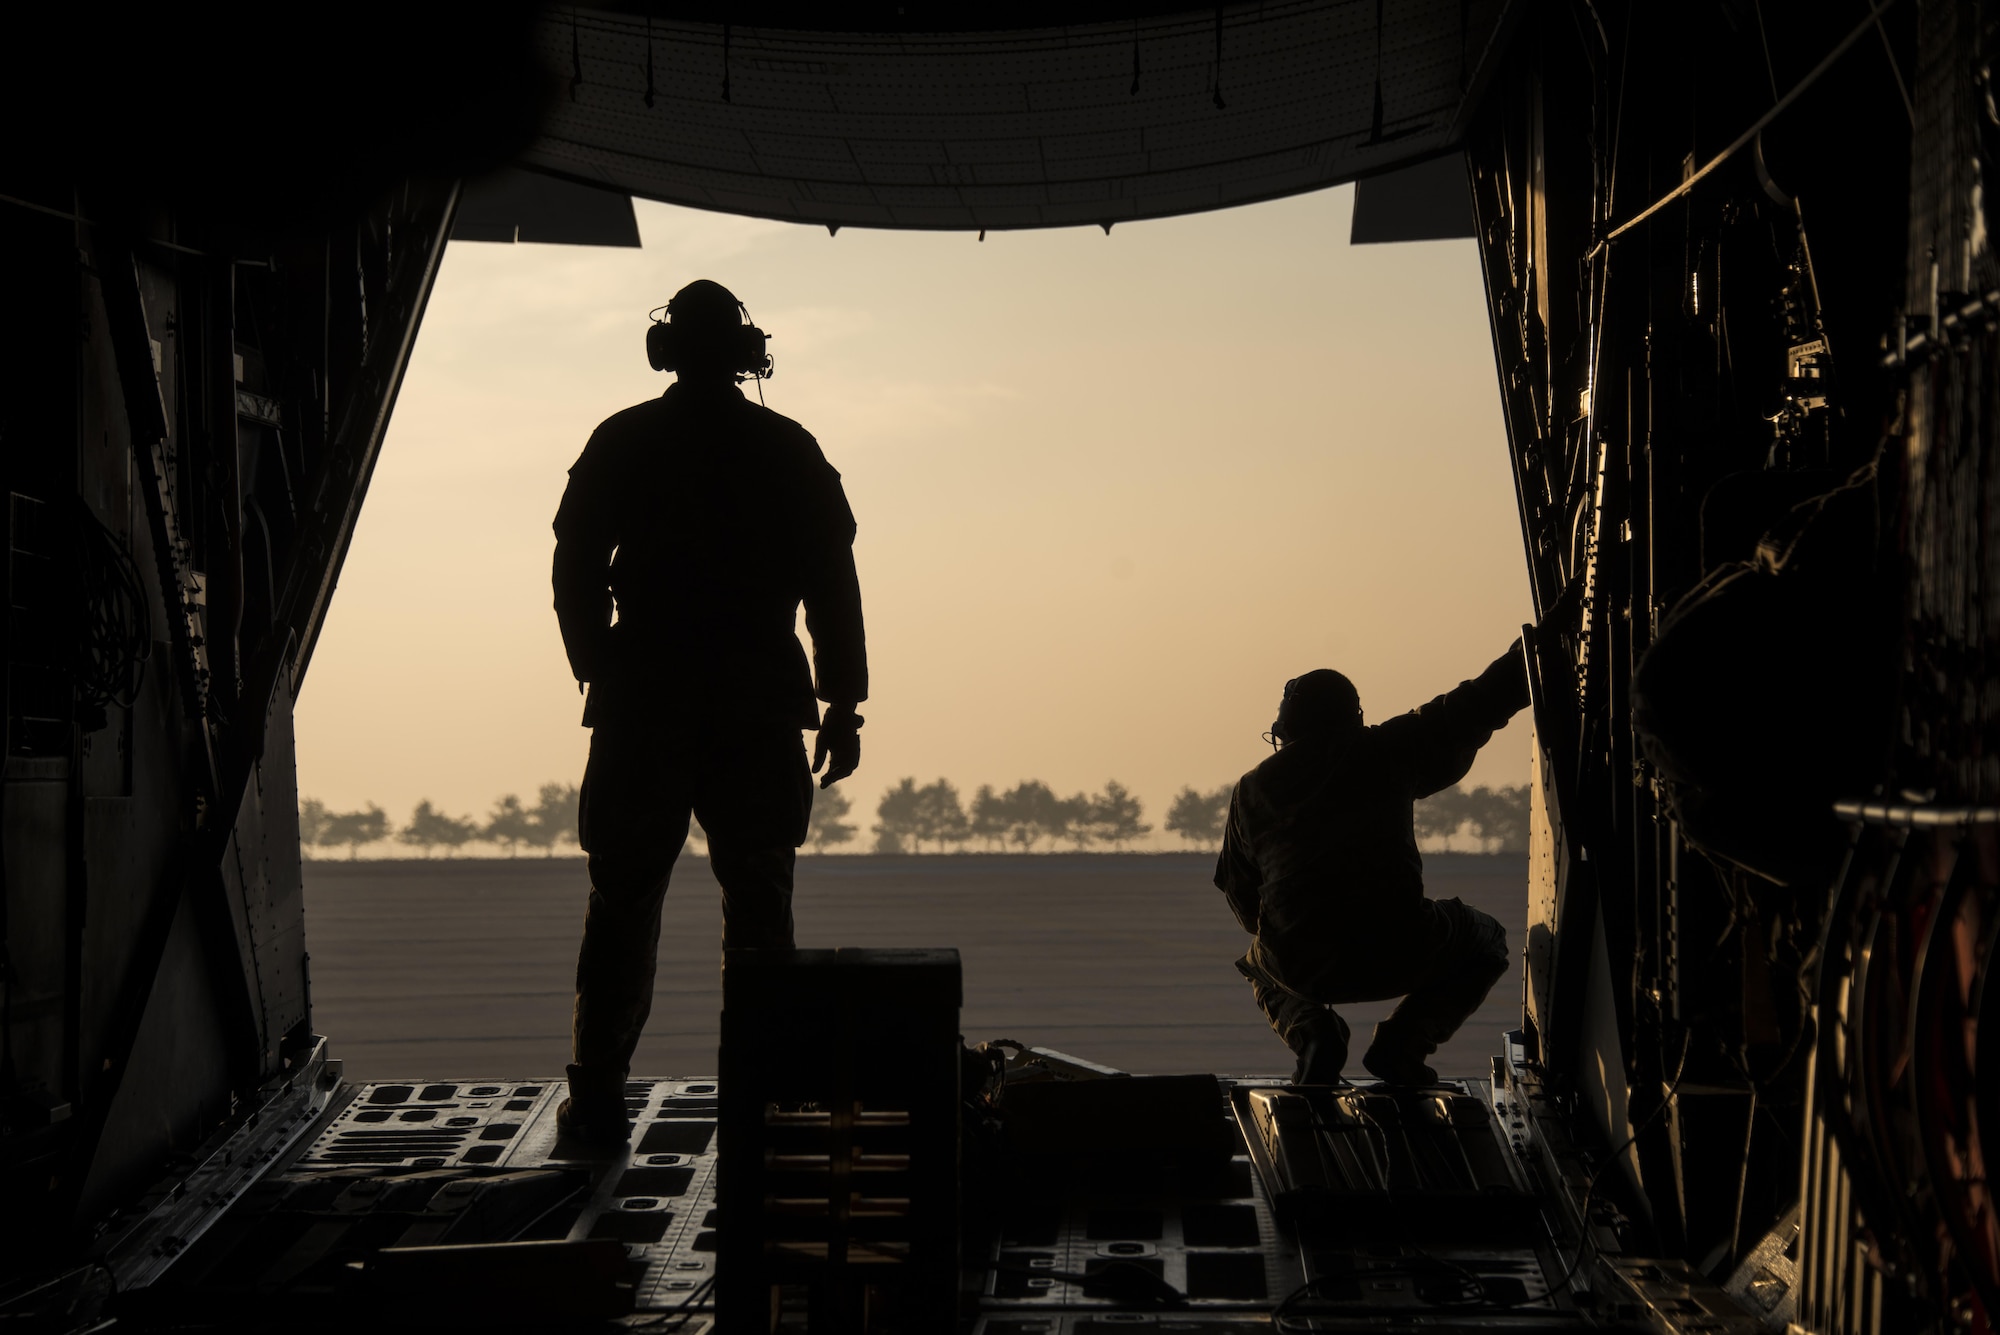 Staff Sgts. Craig Bailey and Shaun LaRue, 1st Special Operations Squadron loadmasters, looks out the window of an MC-130H Combat Talon II during low-level air intercept (AI) training with three F-16C Fighting Falcons from the 35th Fighter Squadron at Kunsan Air Base, Oct. 19, 2016. This opportunity provided the 1st SOS and 35th FS crews with invaluable AI training. (U.S. Air Force photo by Capt. Jessica Tait)